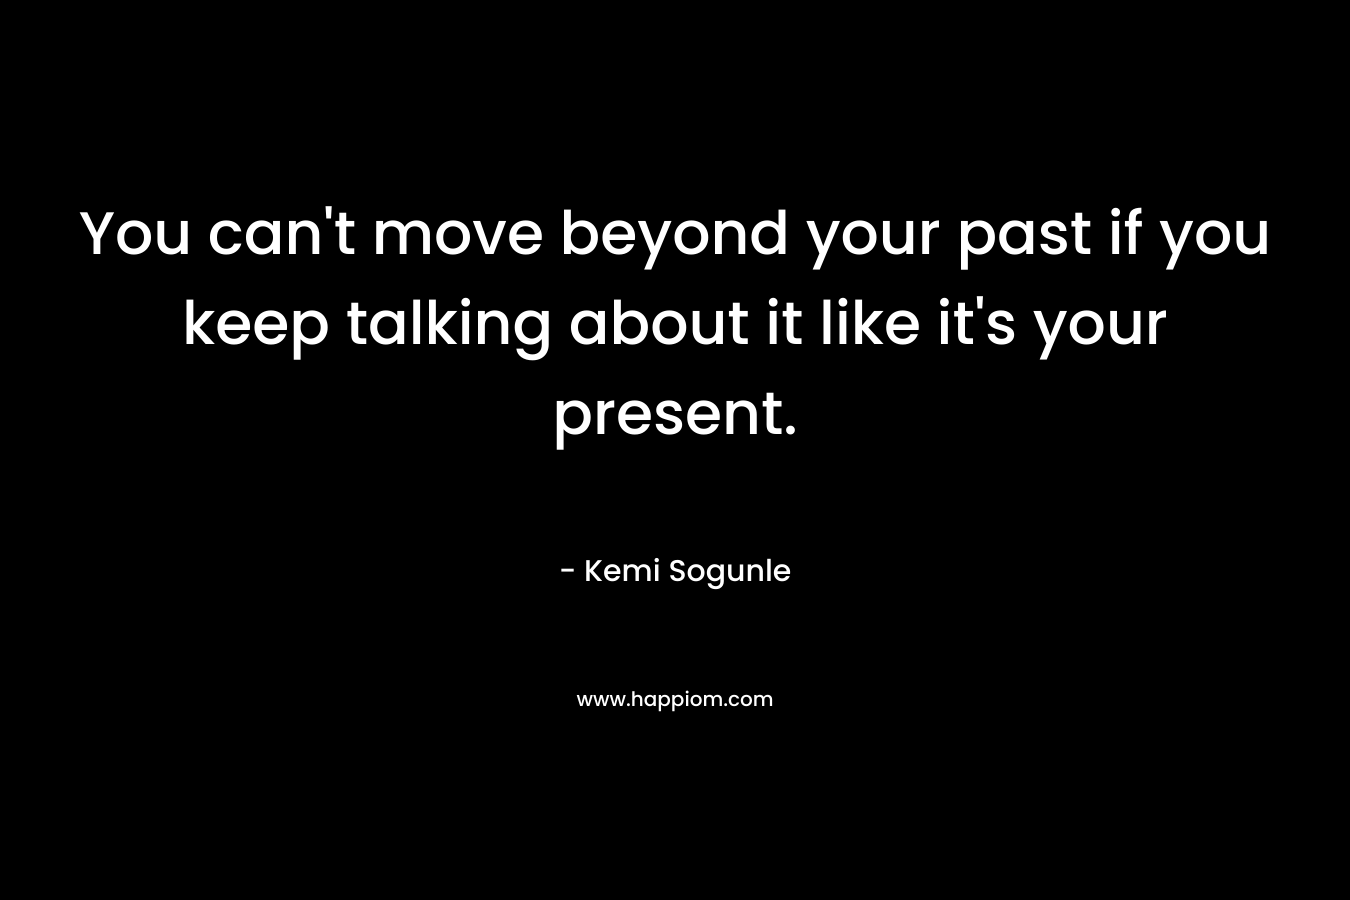 You can't move beyond your past if you keep talking about it like it's your present.